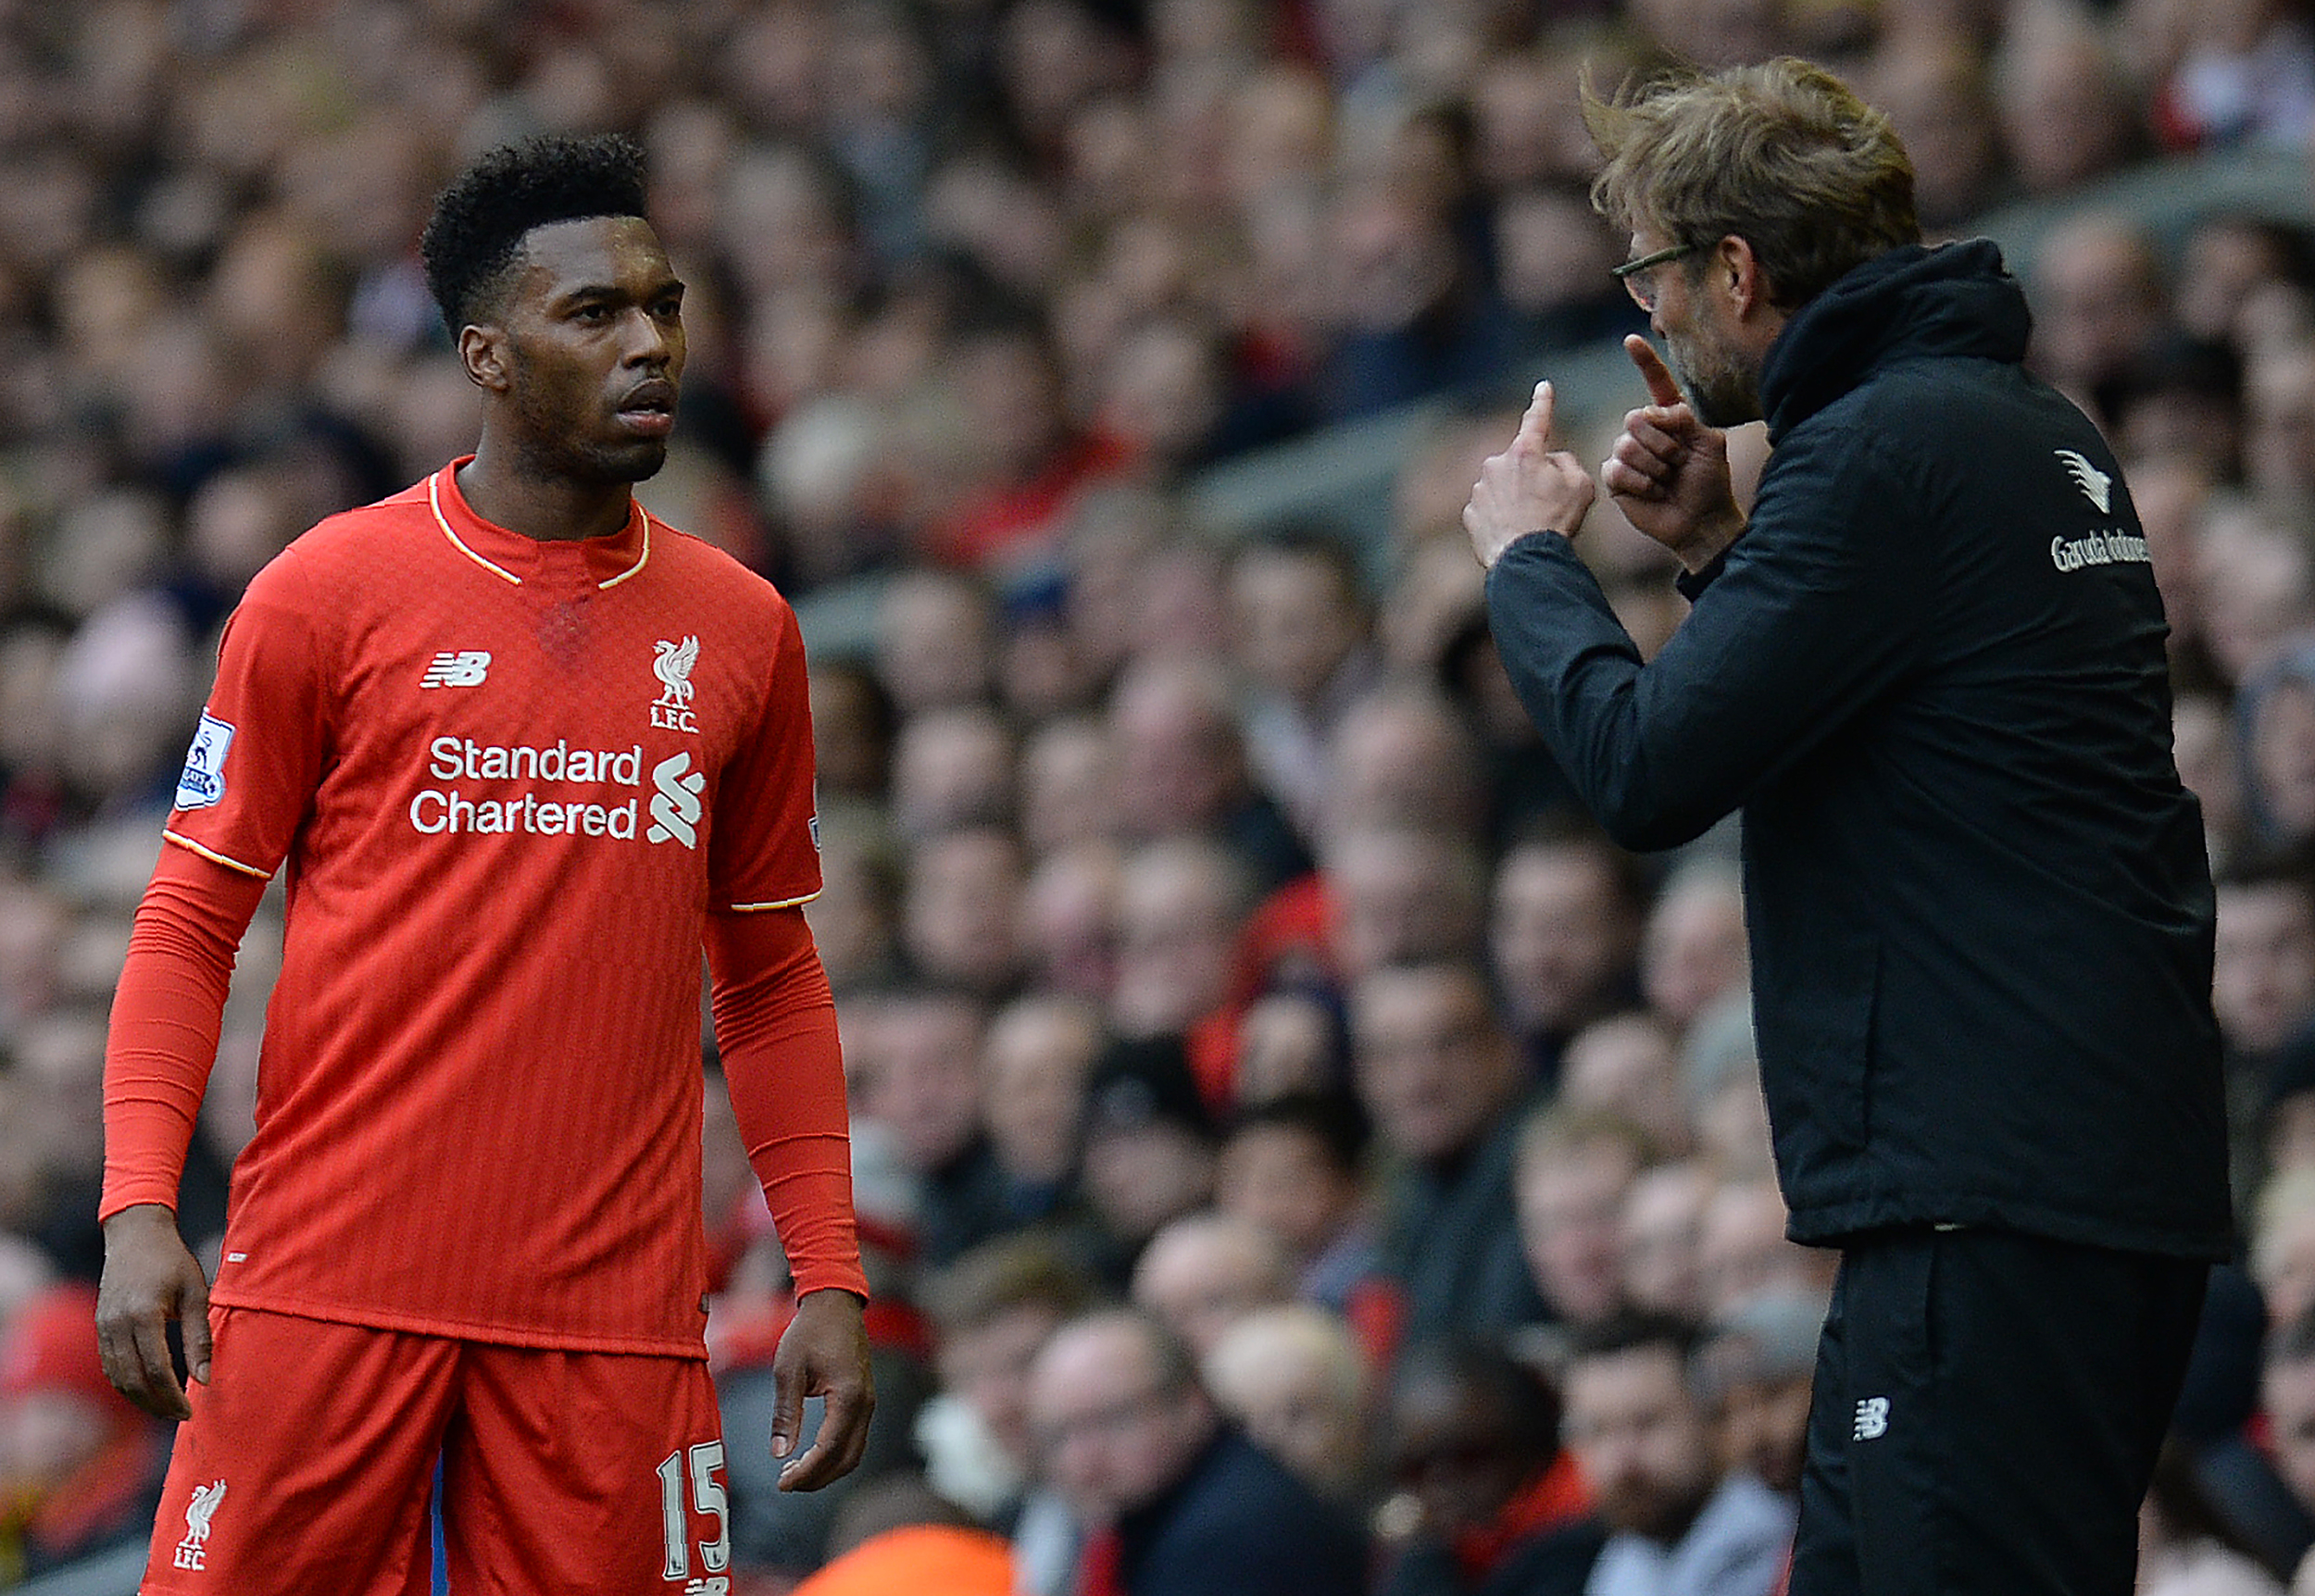 Liverpool's German manager Jurgen Klopp (R) gives instructions to Liverpool's English striker Daniel Sturridge during the English Premier League football match between Liverpool and Stoke City at Anfield in Liverpool, northwest England on April 10, 2016. / AFP / OLI SCARFF / RESTRICTED TO EDITORIAL USE. No use with unauthorized audio, video, data, fixture lists, club/league logos or 'live' services. Online in-match use limited to 75 images, no video emulation. No use in betting, games or single club/league/player publications.  /         (Photo credit should read OLI SCARFF/AFP/Getty Images)